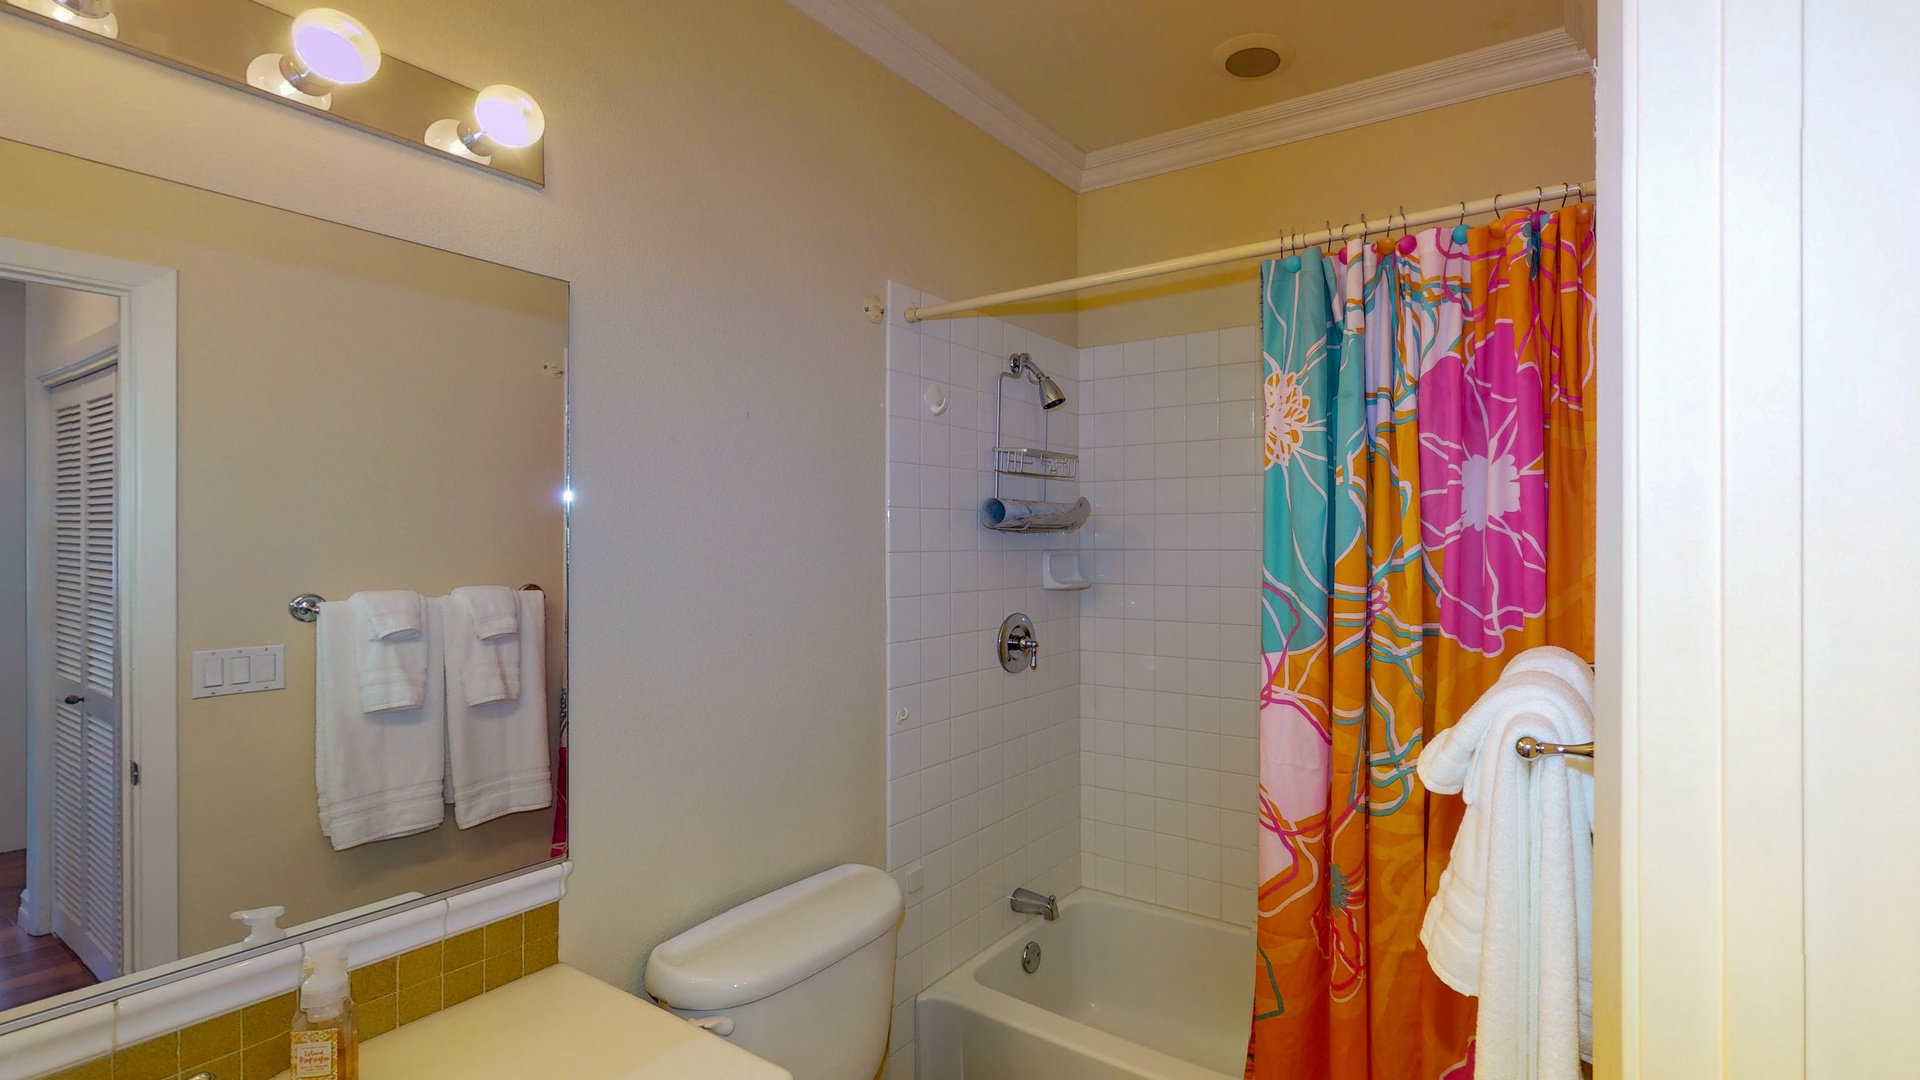 Kapolei Vacation Rentals, Coconut Plantation 1200-4 - The guest bathroom has a tub/shower combo and plenty of storage.